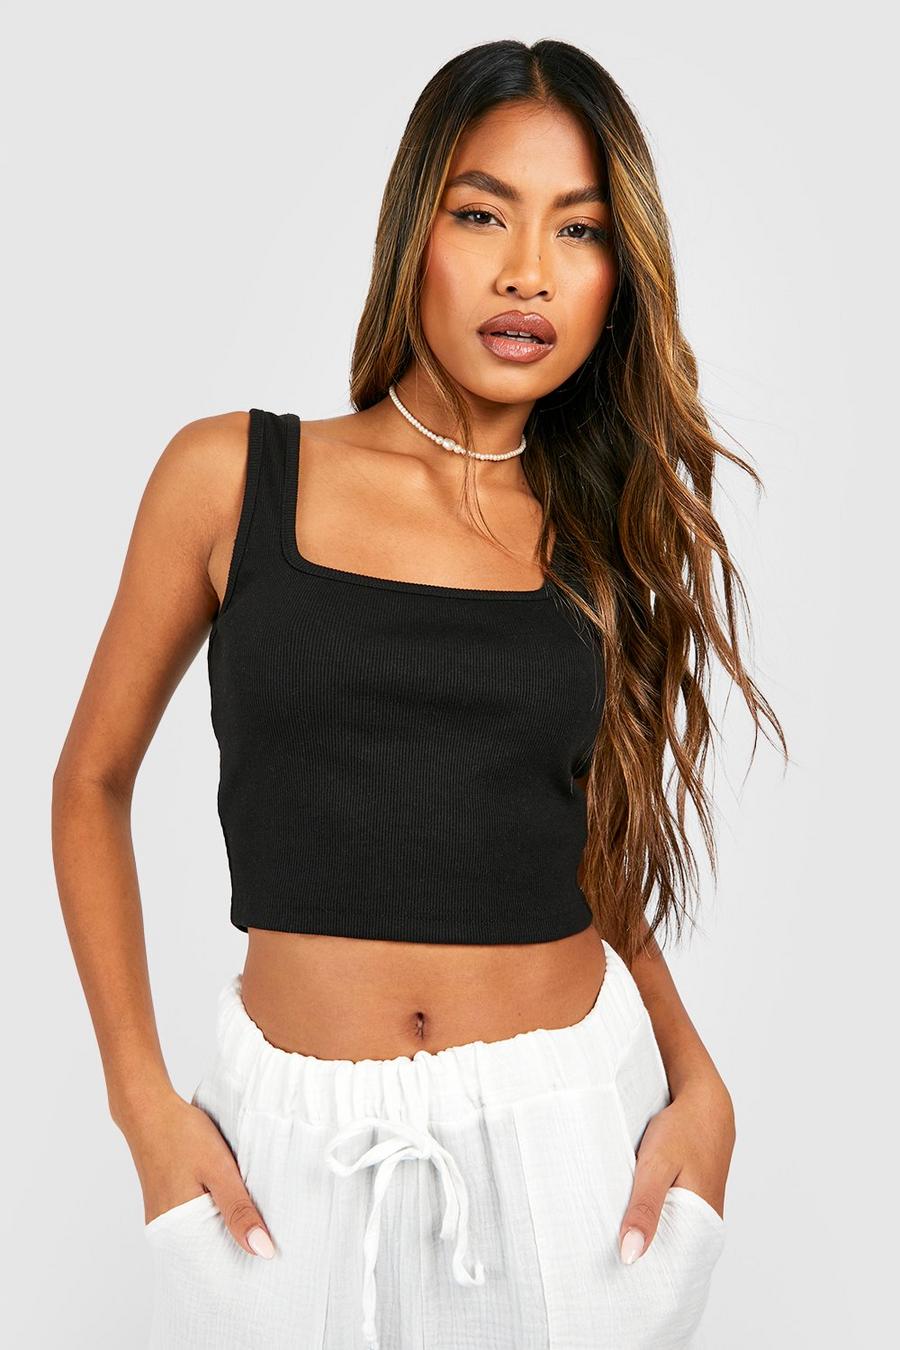 Women's Black Skinny Cami Tops Cutouts Crop Top with 3 Ring, Black